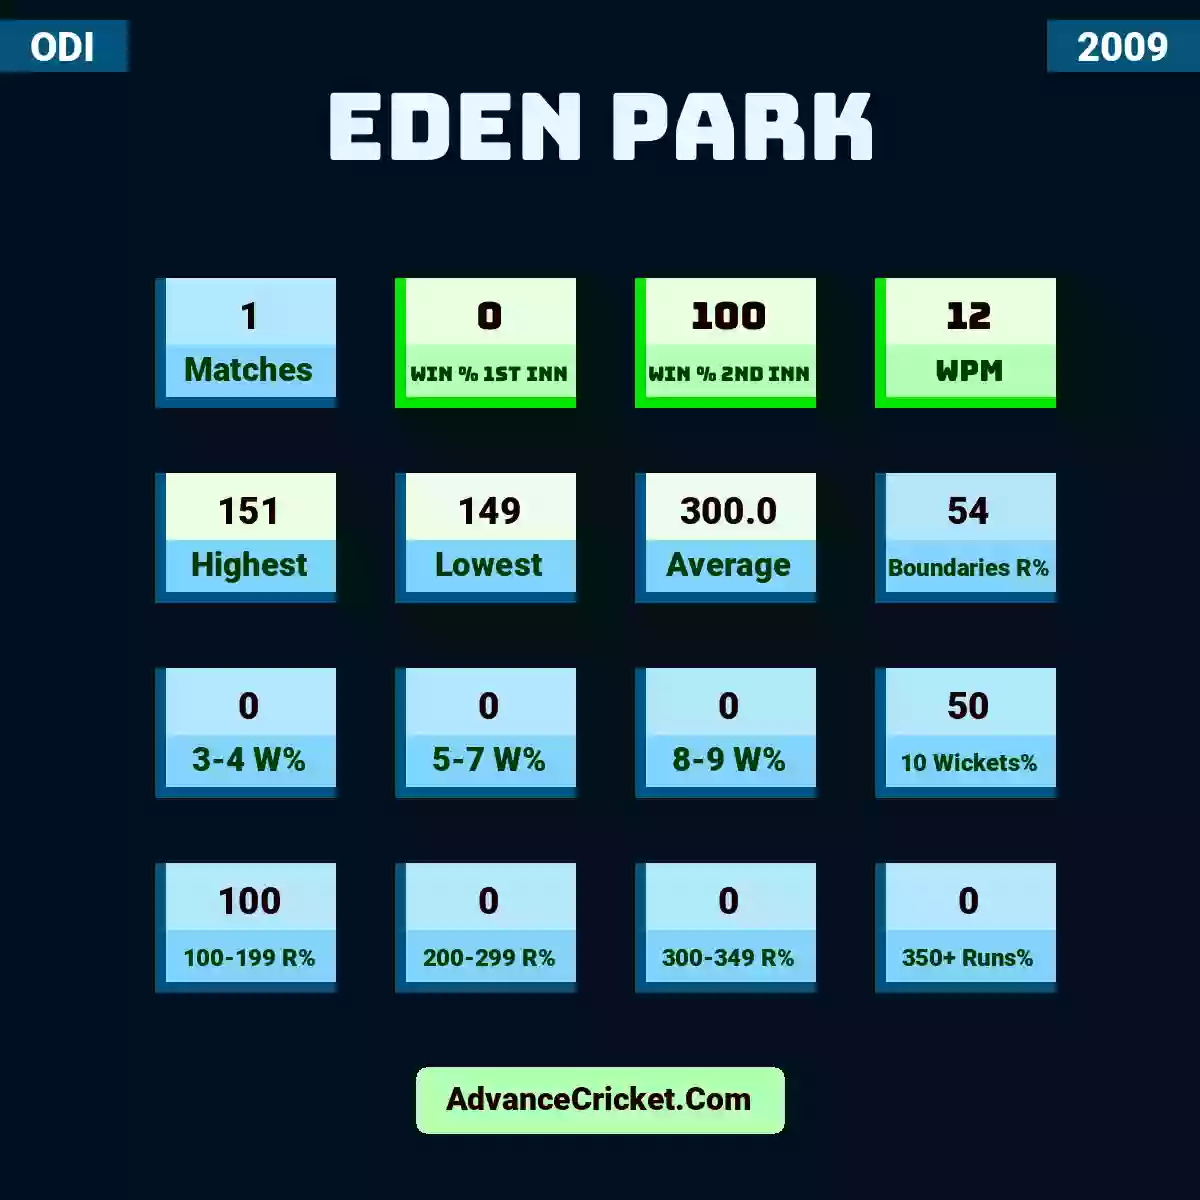 Image showing Eden Park with Matches: 1, Win % 1st Inn: 0, Win % 2nd Inn: 100, WPM: 12, Highest: 151, Lowest: 149, Average: 300.0, Boundaries R%: 54, 3-4 W%: 0, 5-7 W%: 0, 8-9 W%: 0, 10 Wickets%: 50, 100-199 R%: 100, 200-299 R%: 0, 300-349 R%: 0, 350+ Runs%: 0.